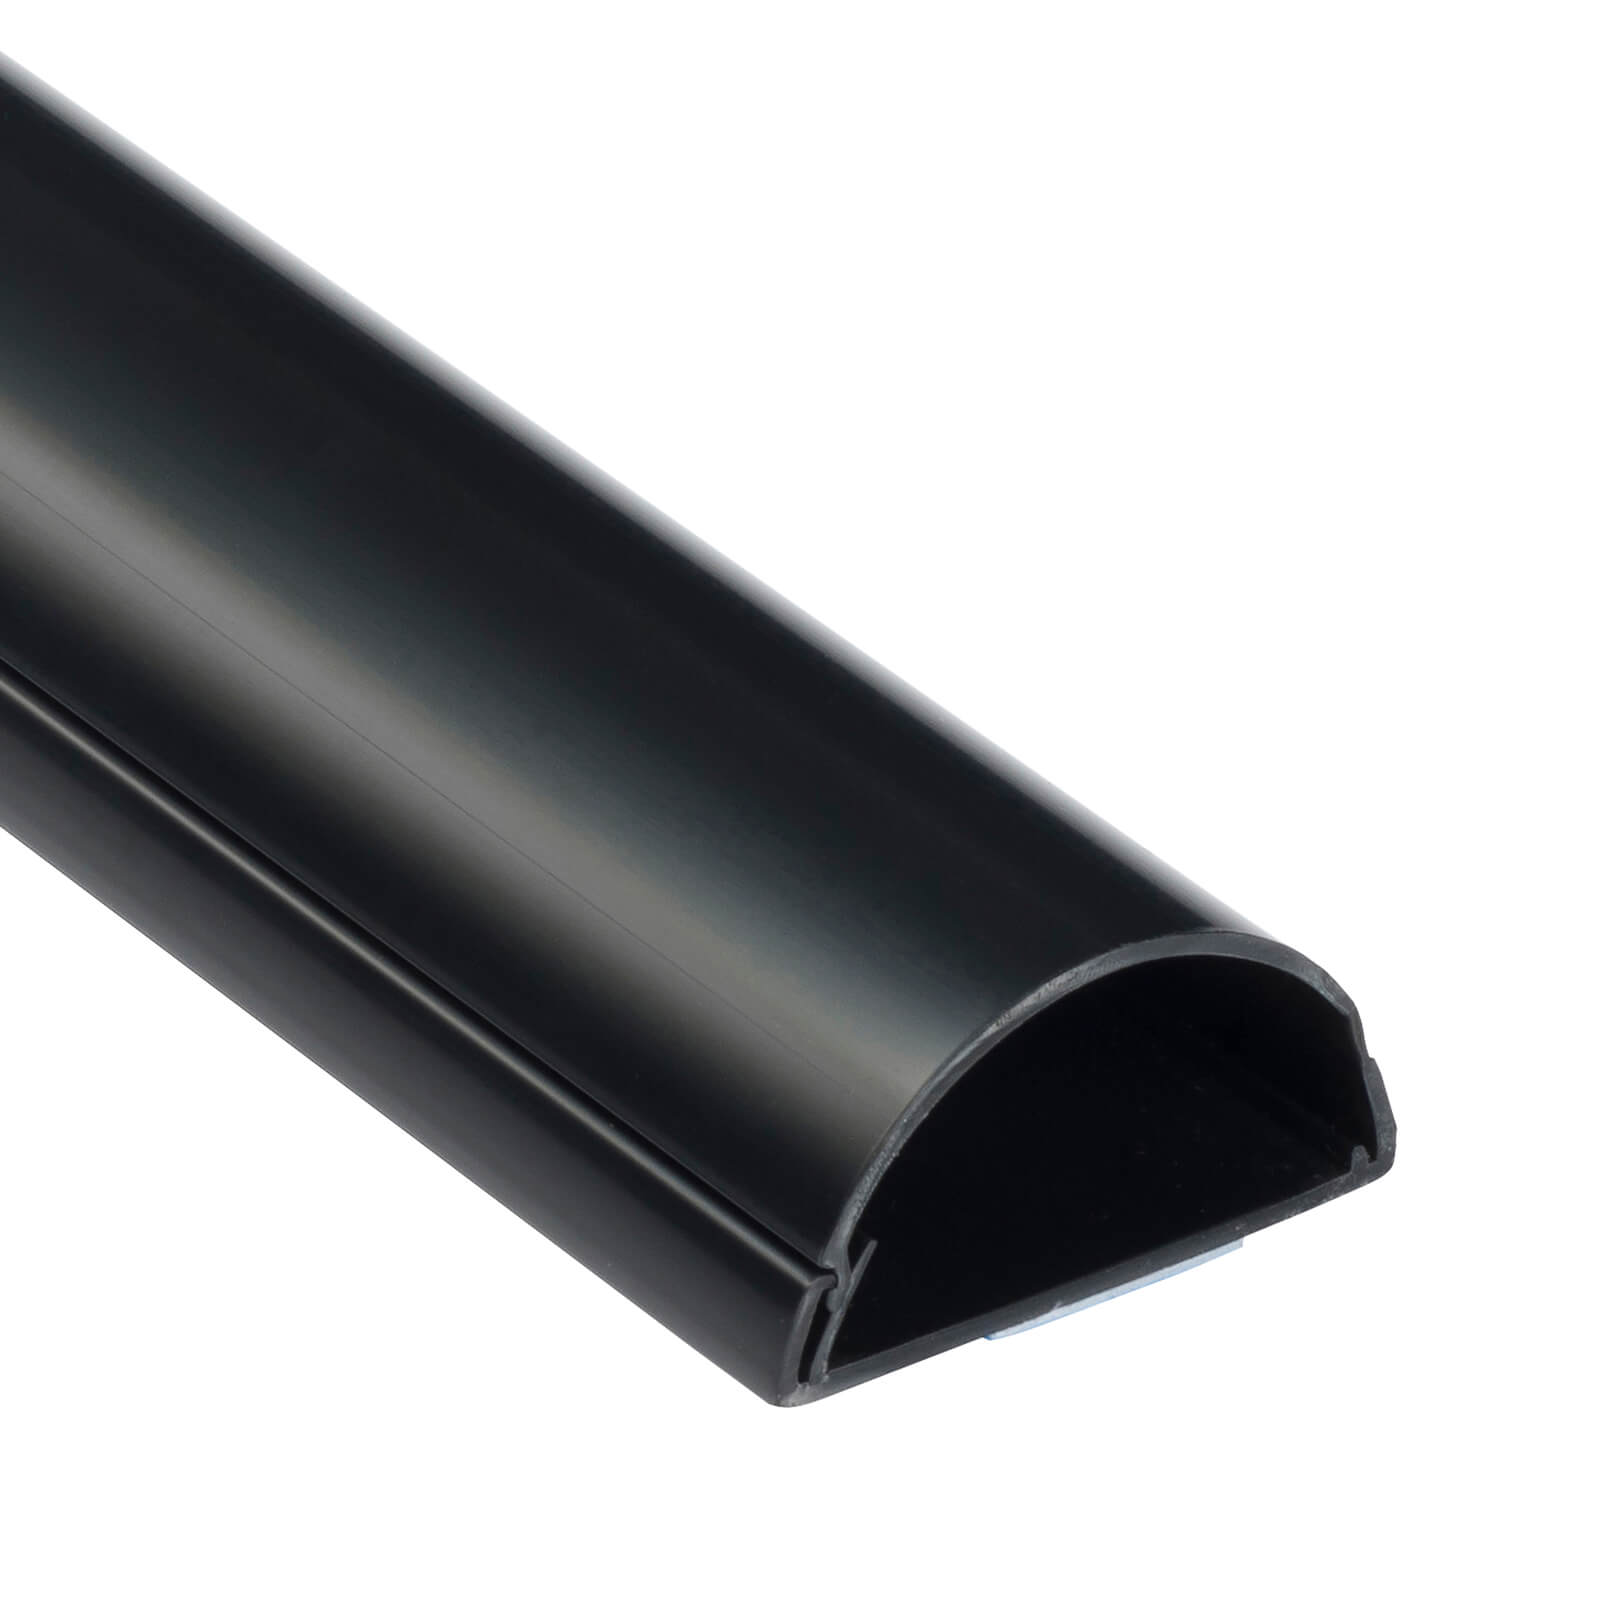 D-Line Maxi Decorative Self-Adhesive Cable Trunking - 50mm x 25mm x 1m, Black